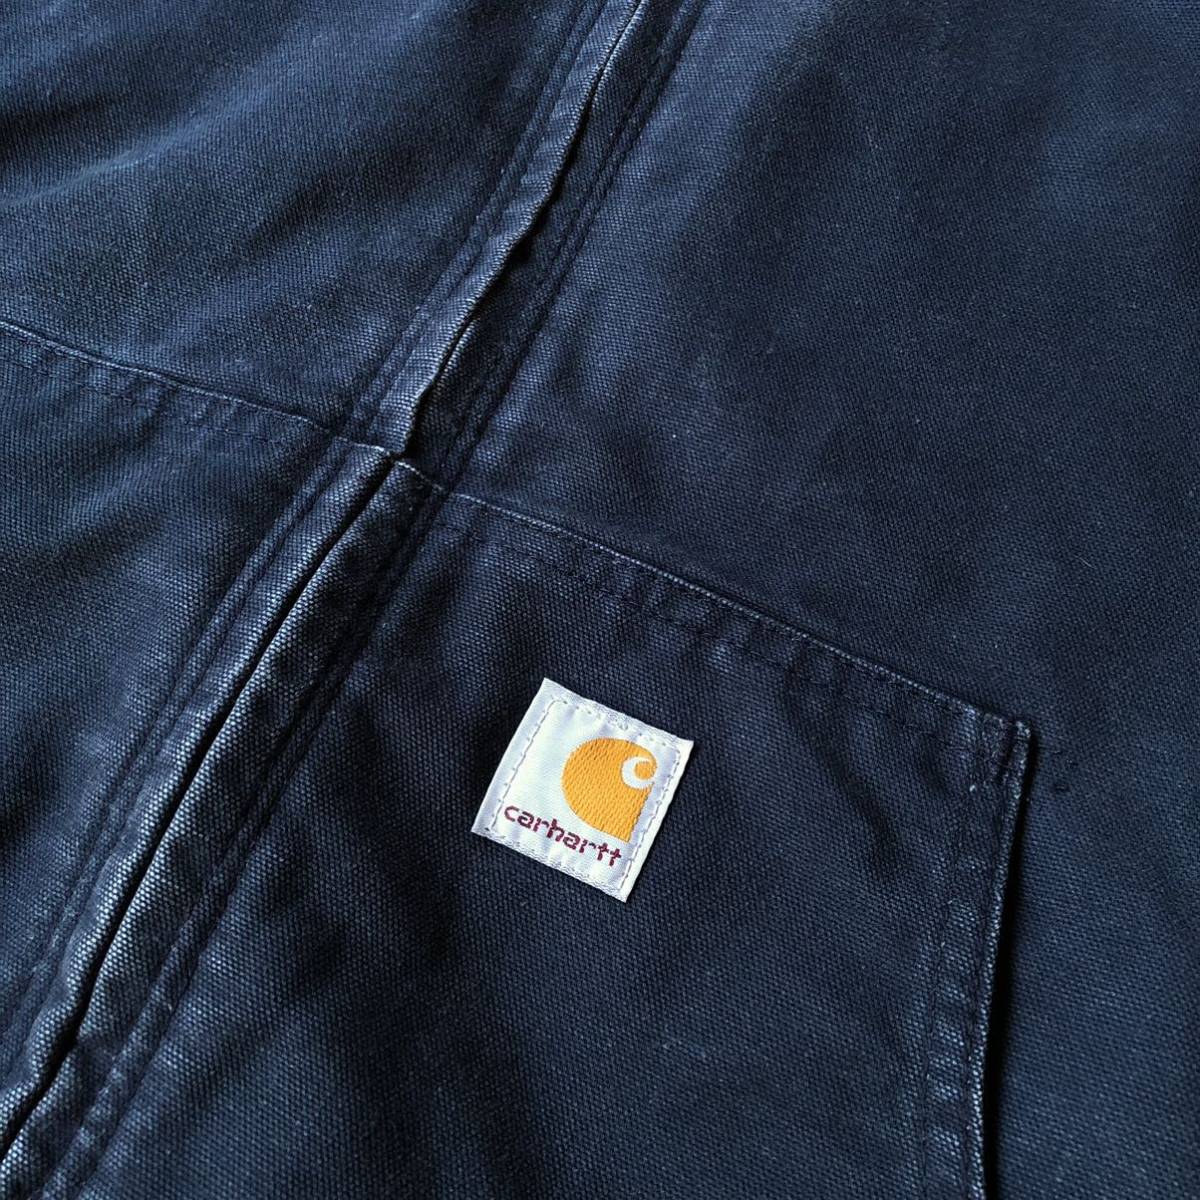 00s Carhartt Active Jacket Navy XLサイズ made in Mexico Duck Parka 2000年代 カーハート アクティブジャケット ダックパーカー vintage_画像5